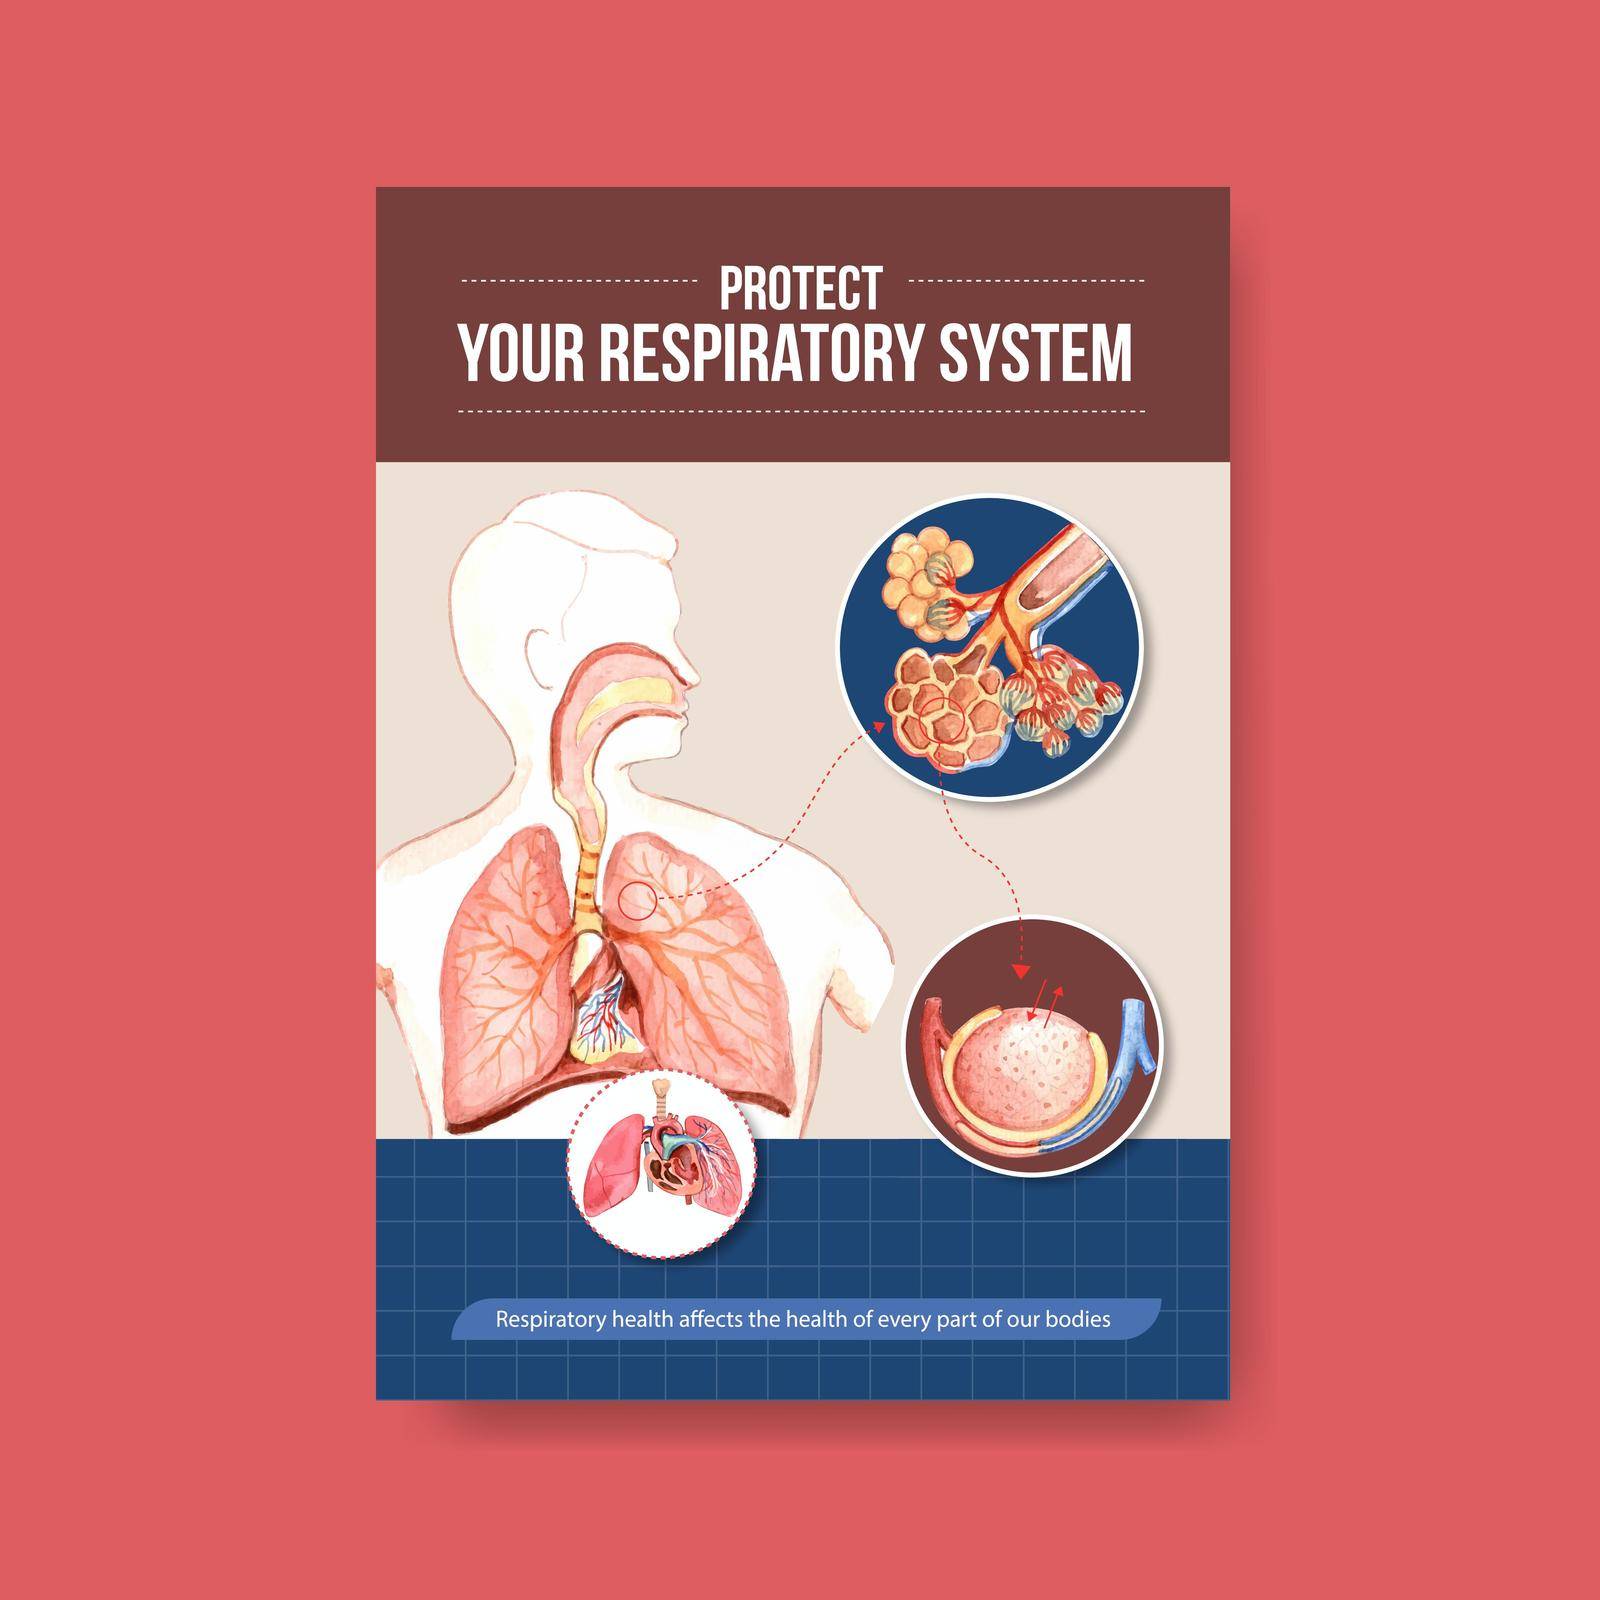 information about anatomy of the respiratory system and understanding an essential system by Photographeeasia